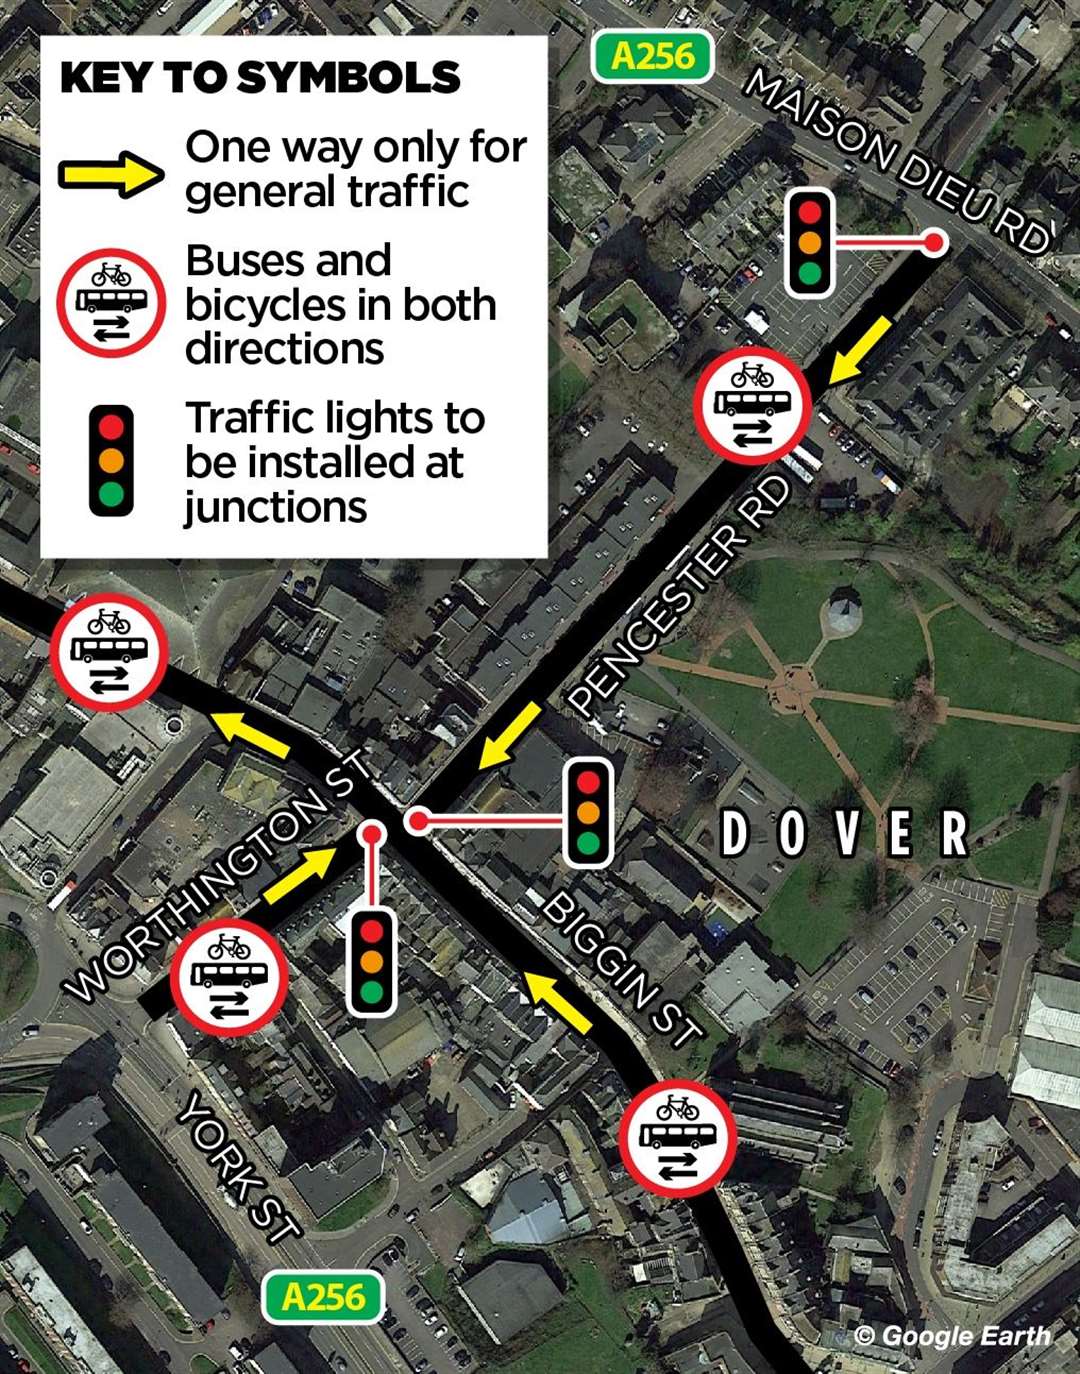 Kent County Council has put forward plans to introduce a contraflow for buses and cycles only in Pencester Road, Dover